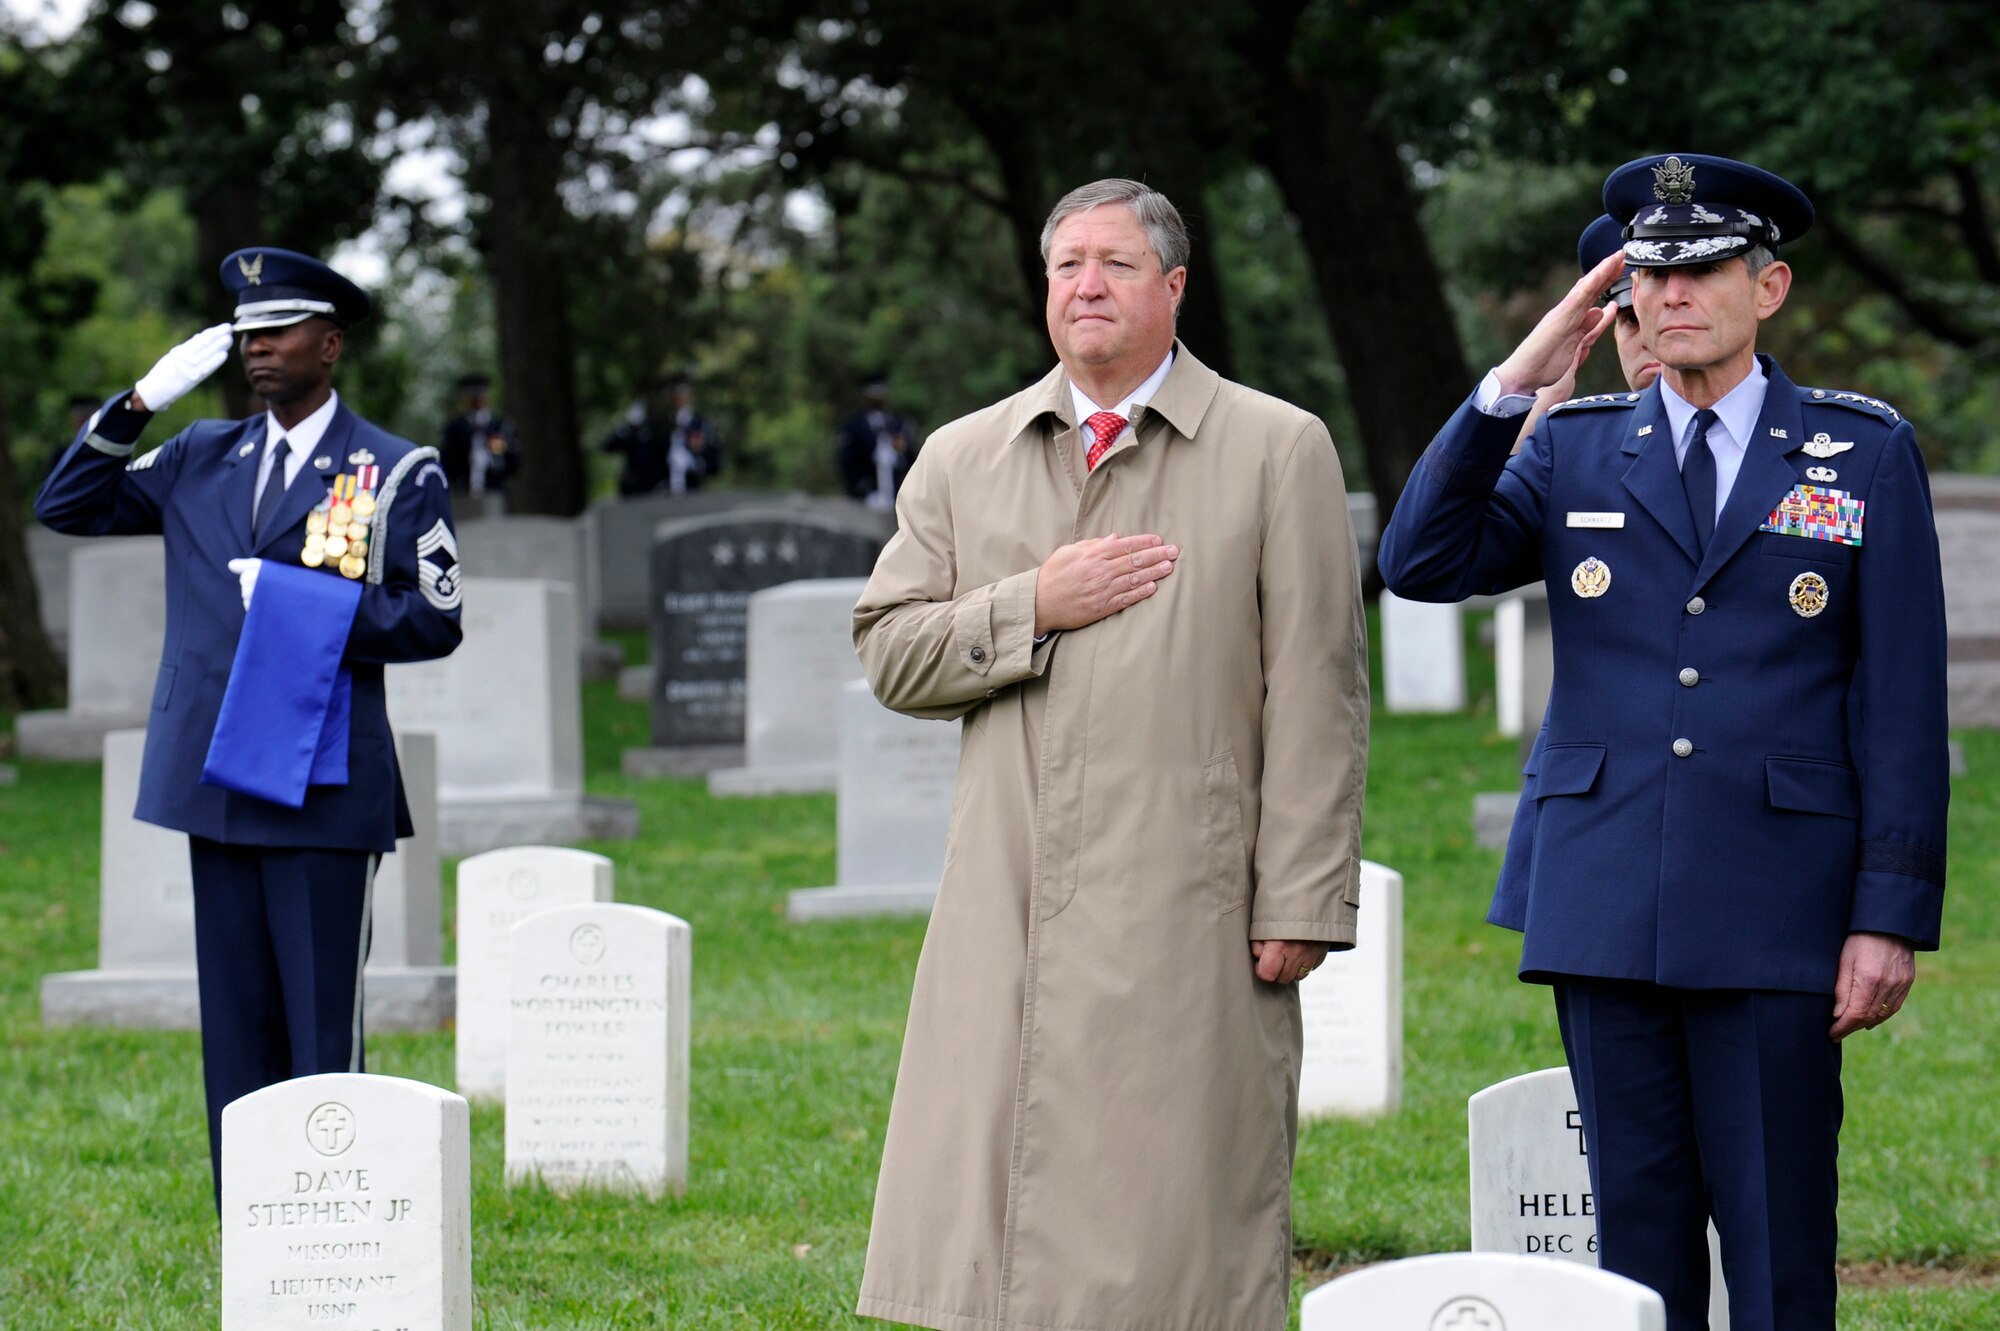 Secretary of the Air Force Michael Donley and Air Force Chief of Staff Gen. Norton Schwartz pay their respects Oct. 3, 2011, at Arlington National Cemetery, Va., during the full-honors funeral of retired Maj. Gen. John Alison. Alison was a war hero and founding father of the Air Force’s special operations forces, having served with the Flying Tigers’ 75th Fighter Squadron and the 1st Air Commando Group during World War II.  (U.S. Air Force photo/Tech. Sgt. Raymond Mills)